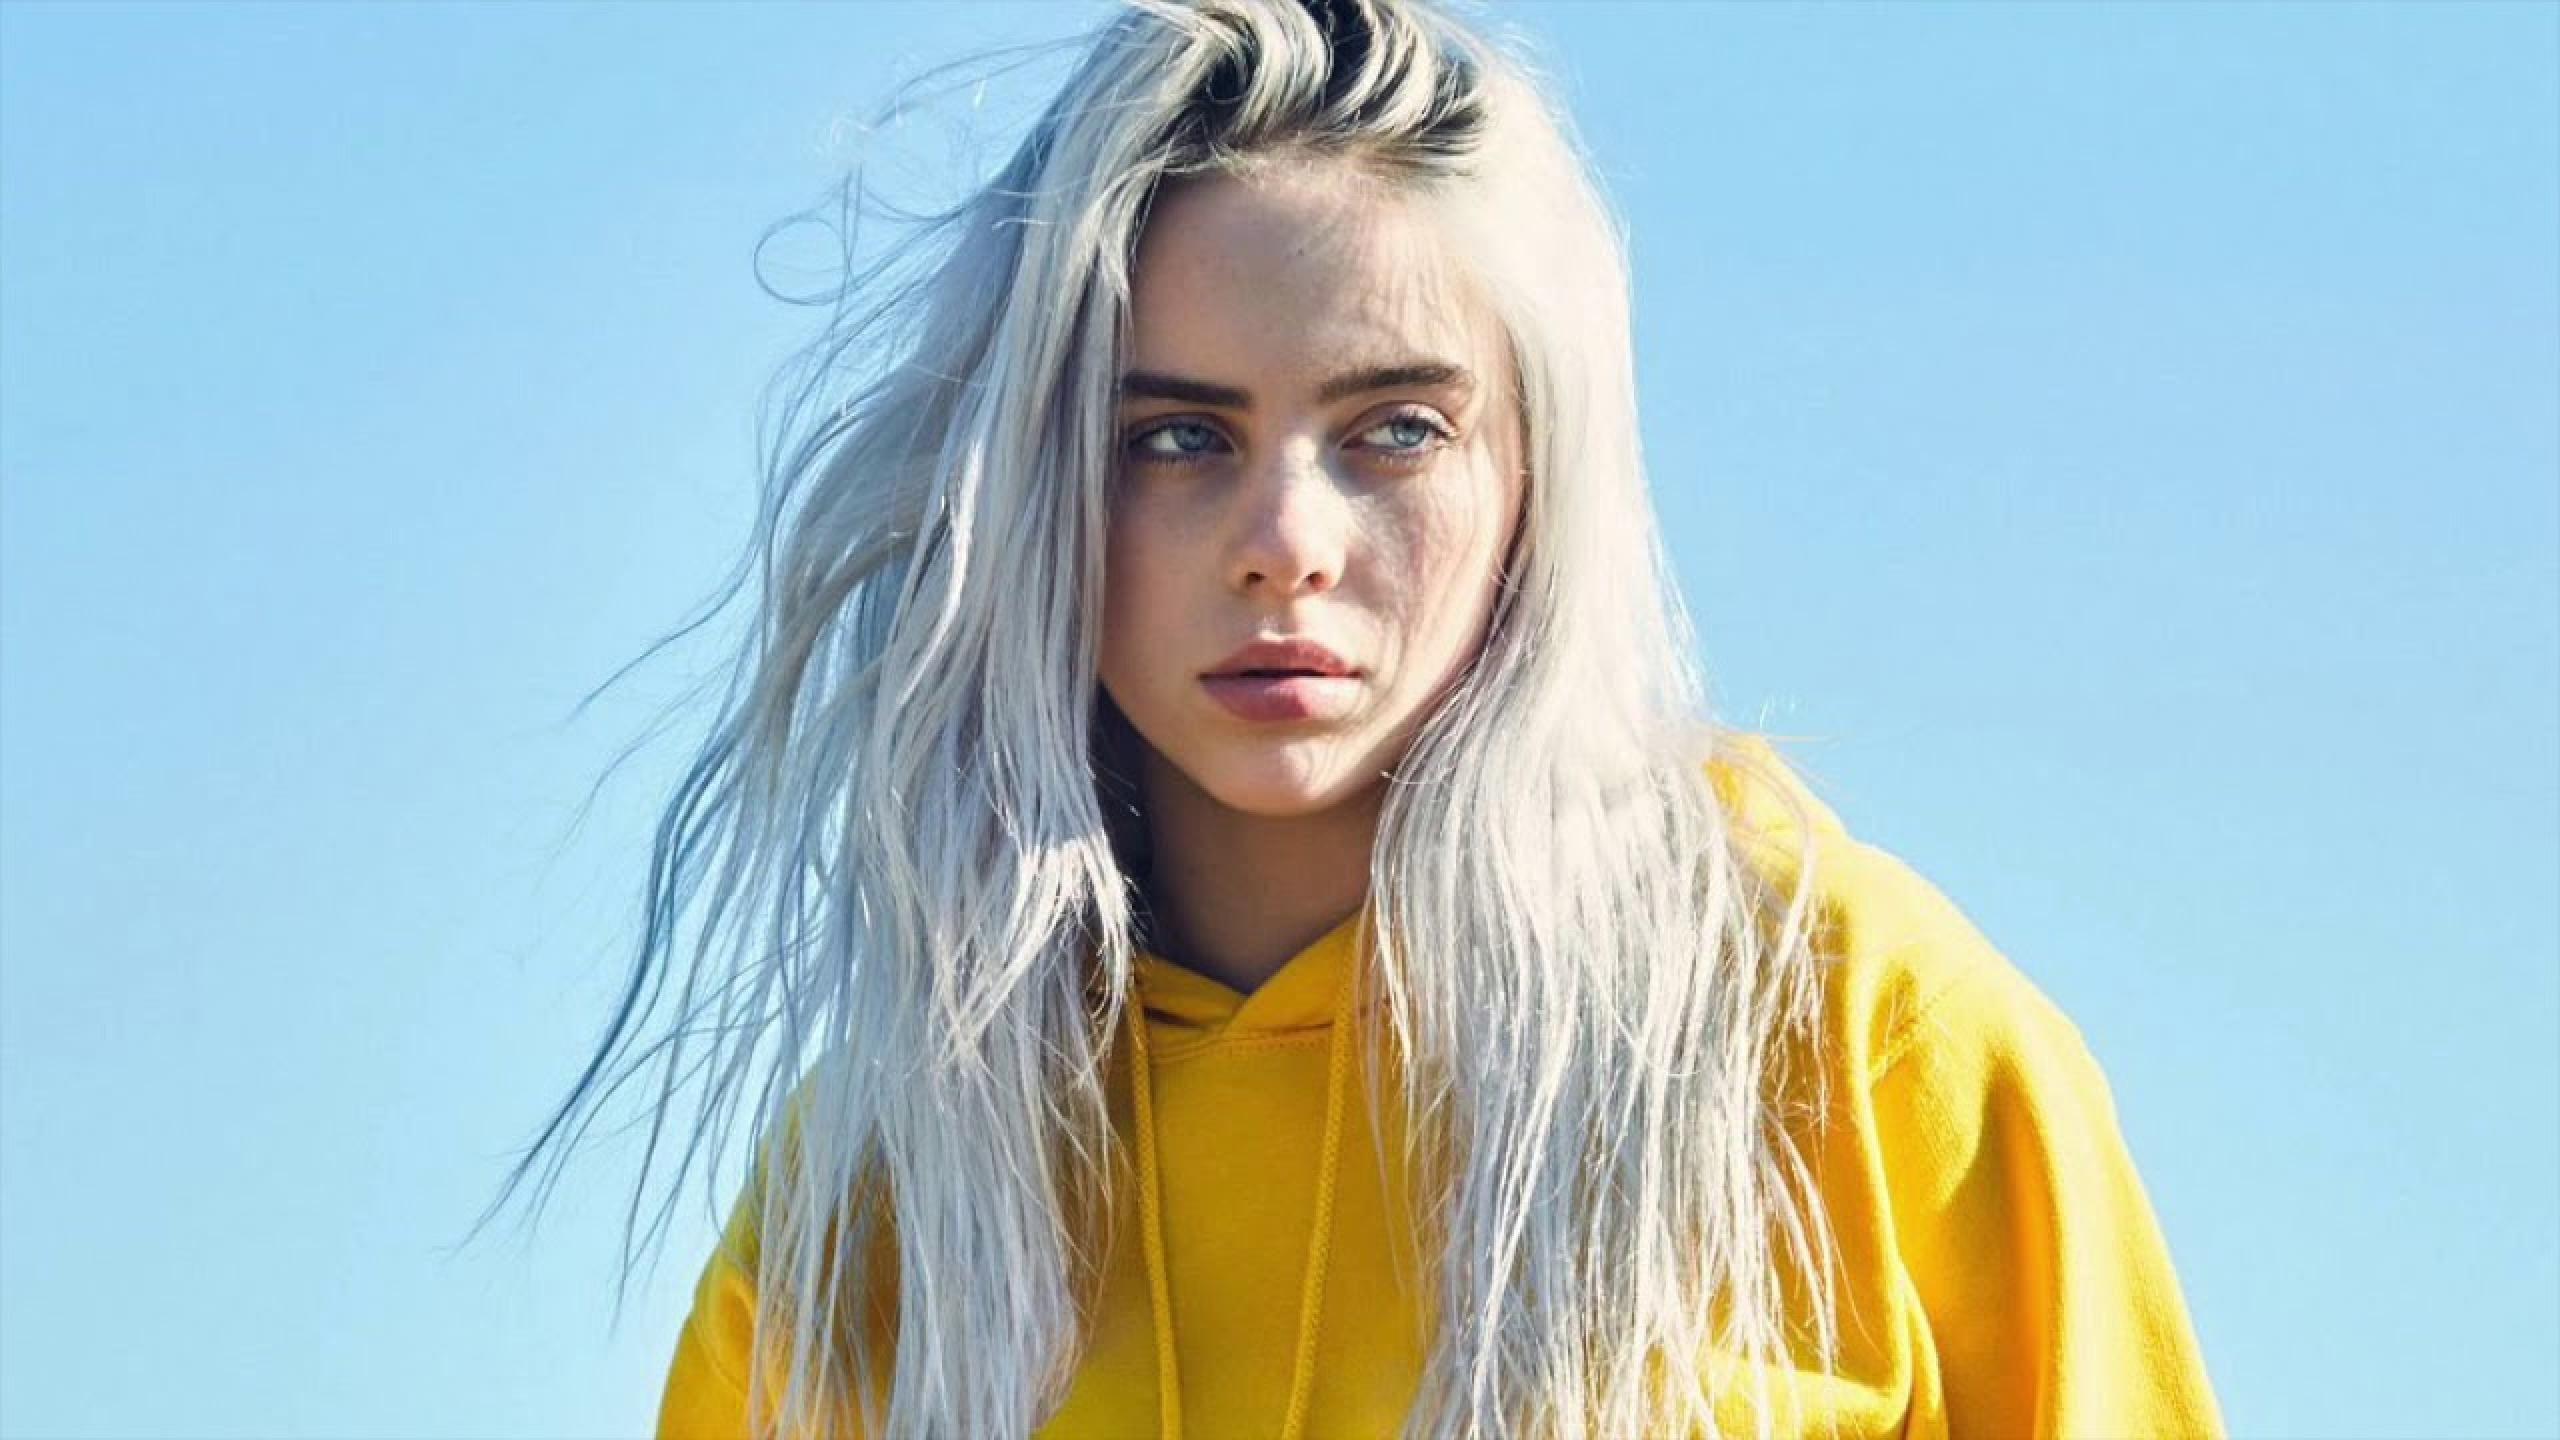  Billie  Eilish  Wallpaper  4K  Background HD for Android 